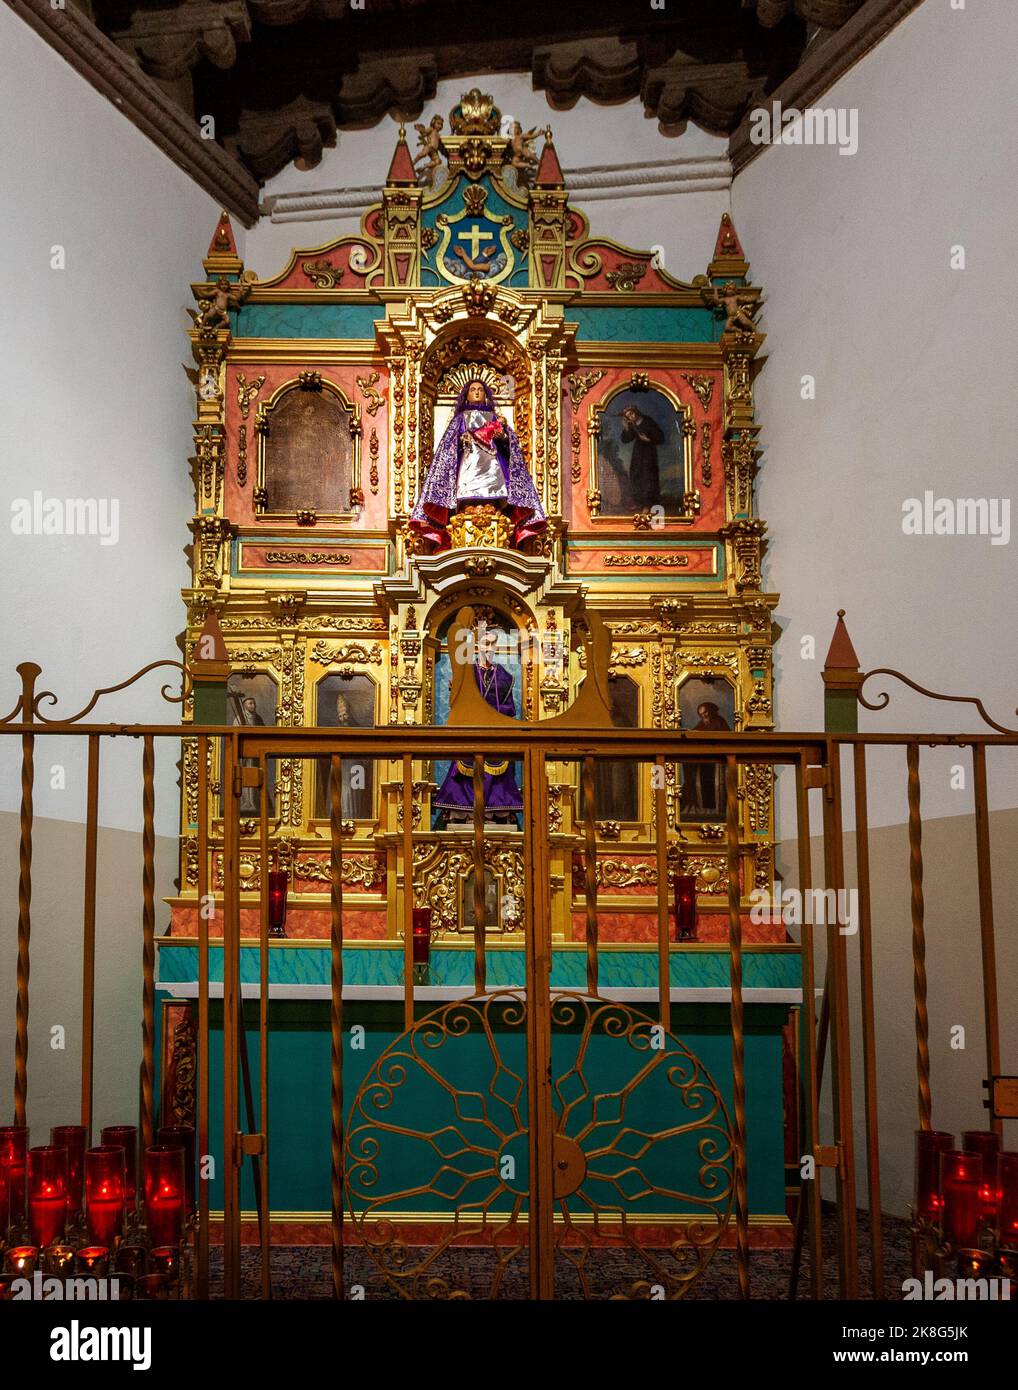 Altarpiece in the La Conquistadora Chapel is in the north transept of the Cathedral Basilica of Saint Francis of Assisi in Santa Fe, New Mexico.  The Stock Photo